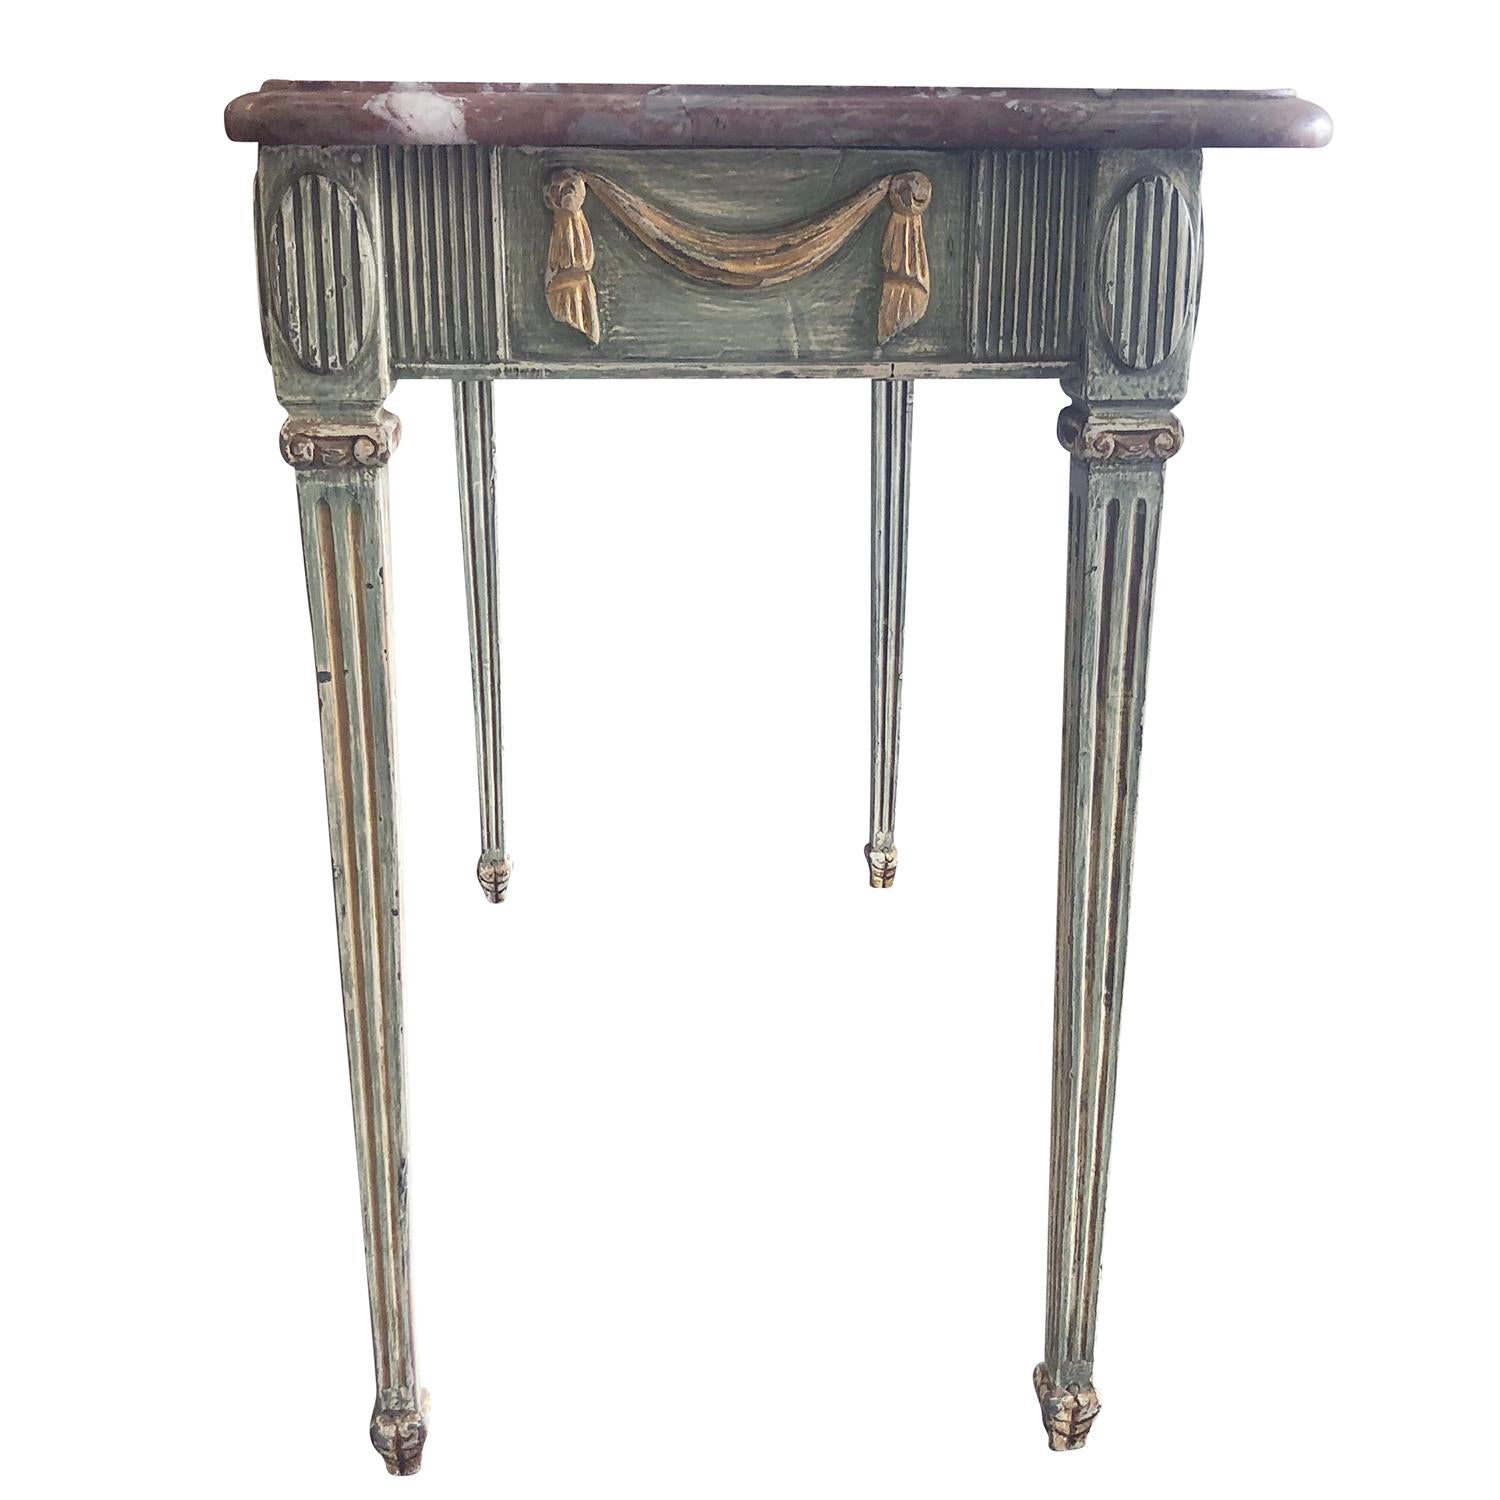 Marble 18th Century Green Swedish Gustavian Console Table, Freestanding Giltwood Table